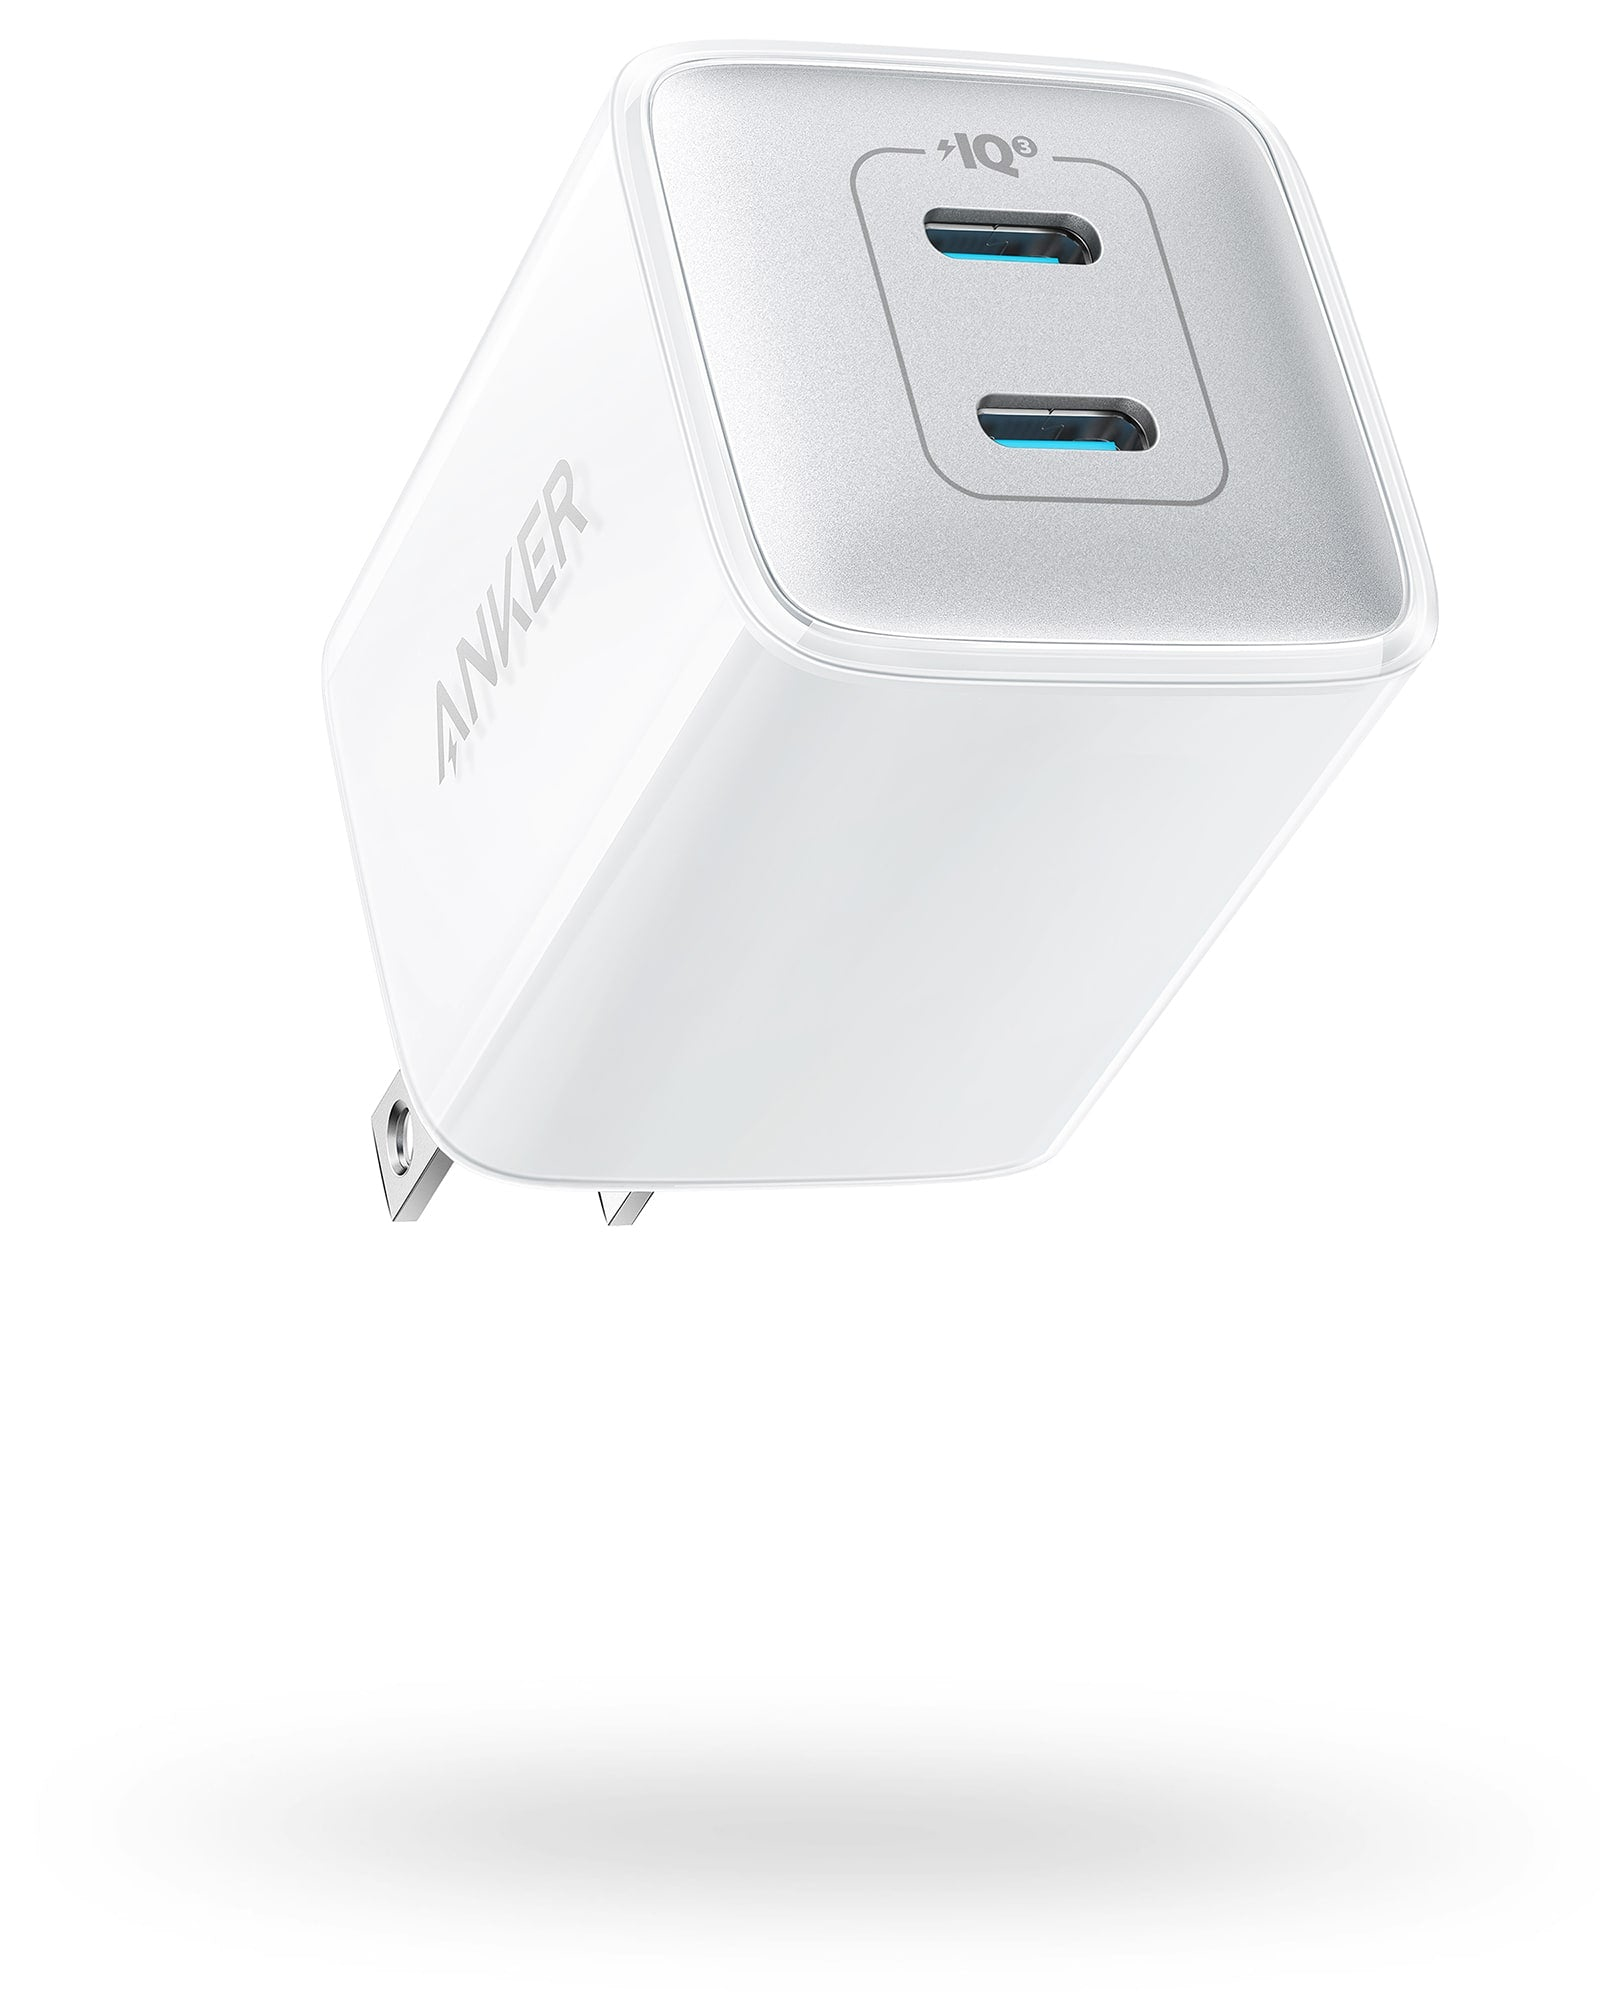 Photos - Charger ANKER 521 Nano Pro Universal White AC Indoor A2038G21 